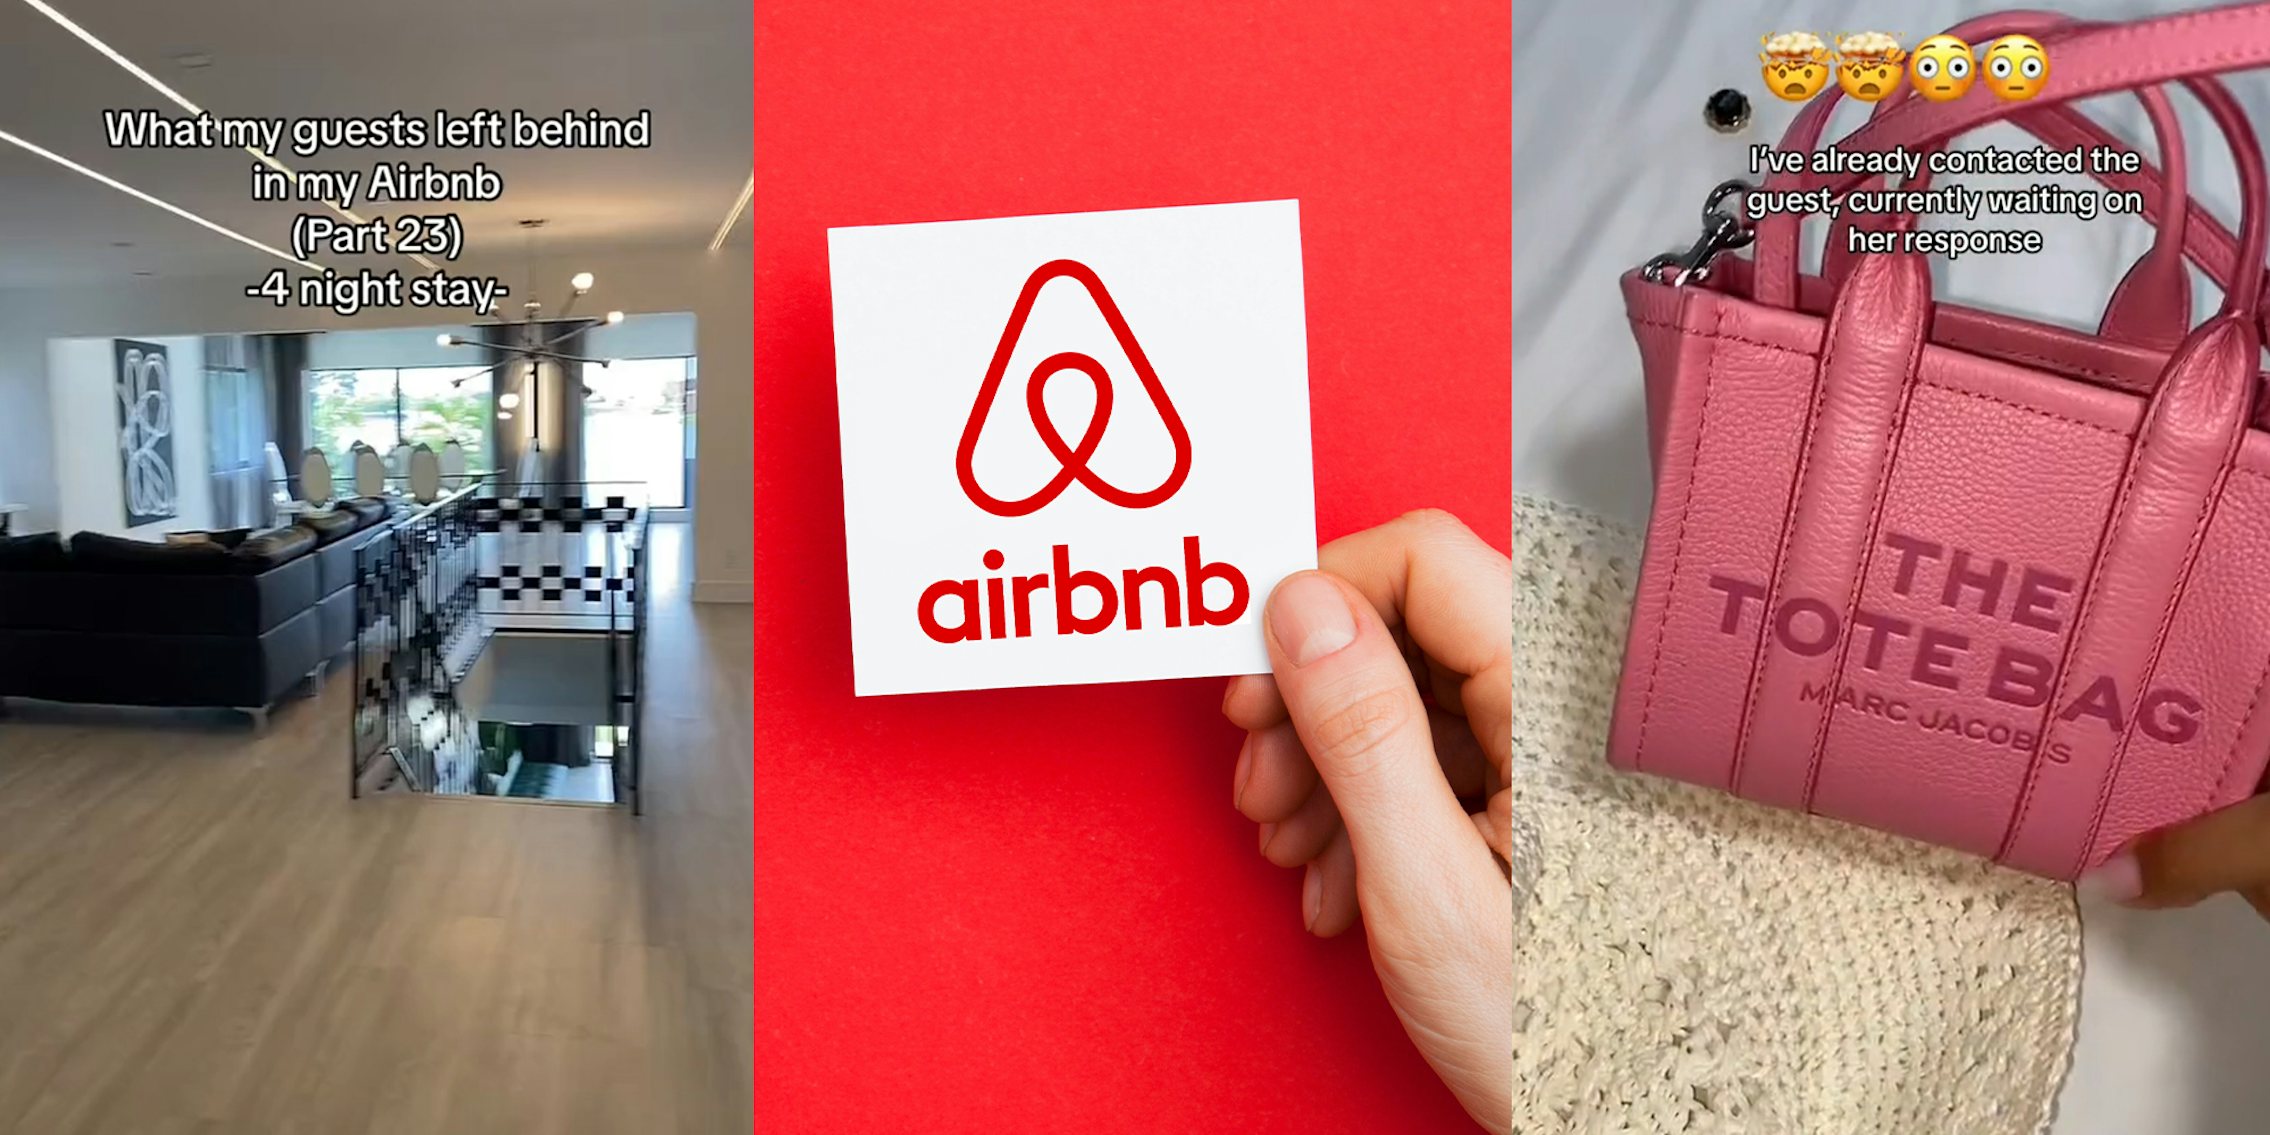 Host shares all the things guests left behind at her Airbnb.